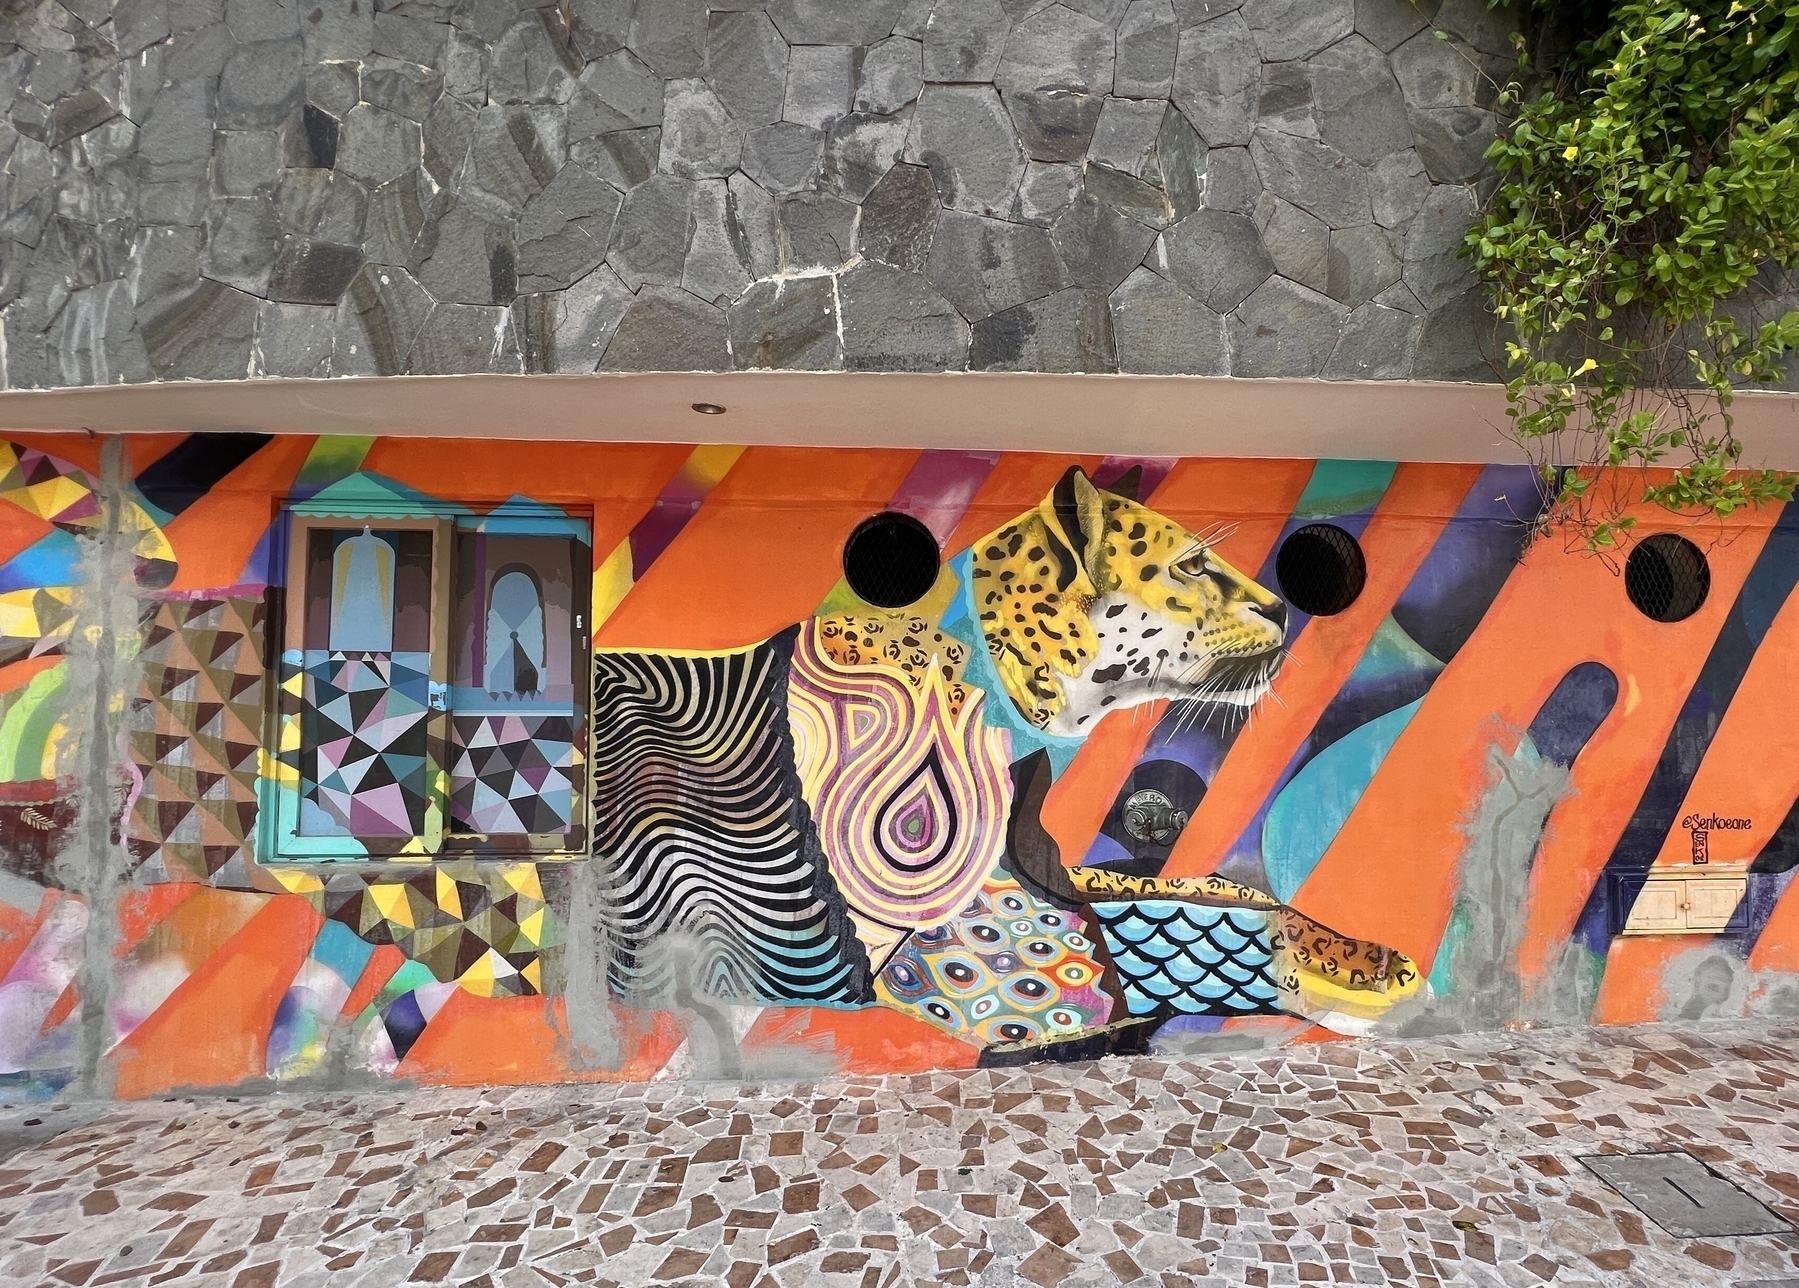 Street art in a Mexican style showing a jaguar head with a zebra body. 